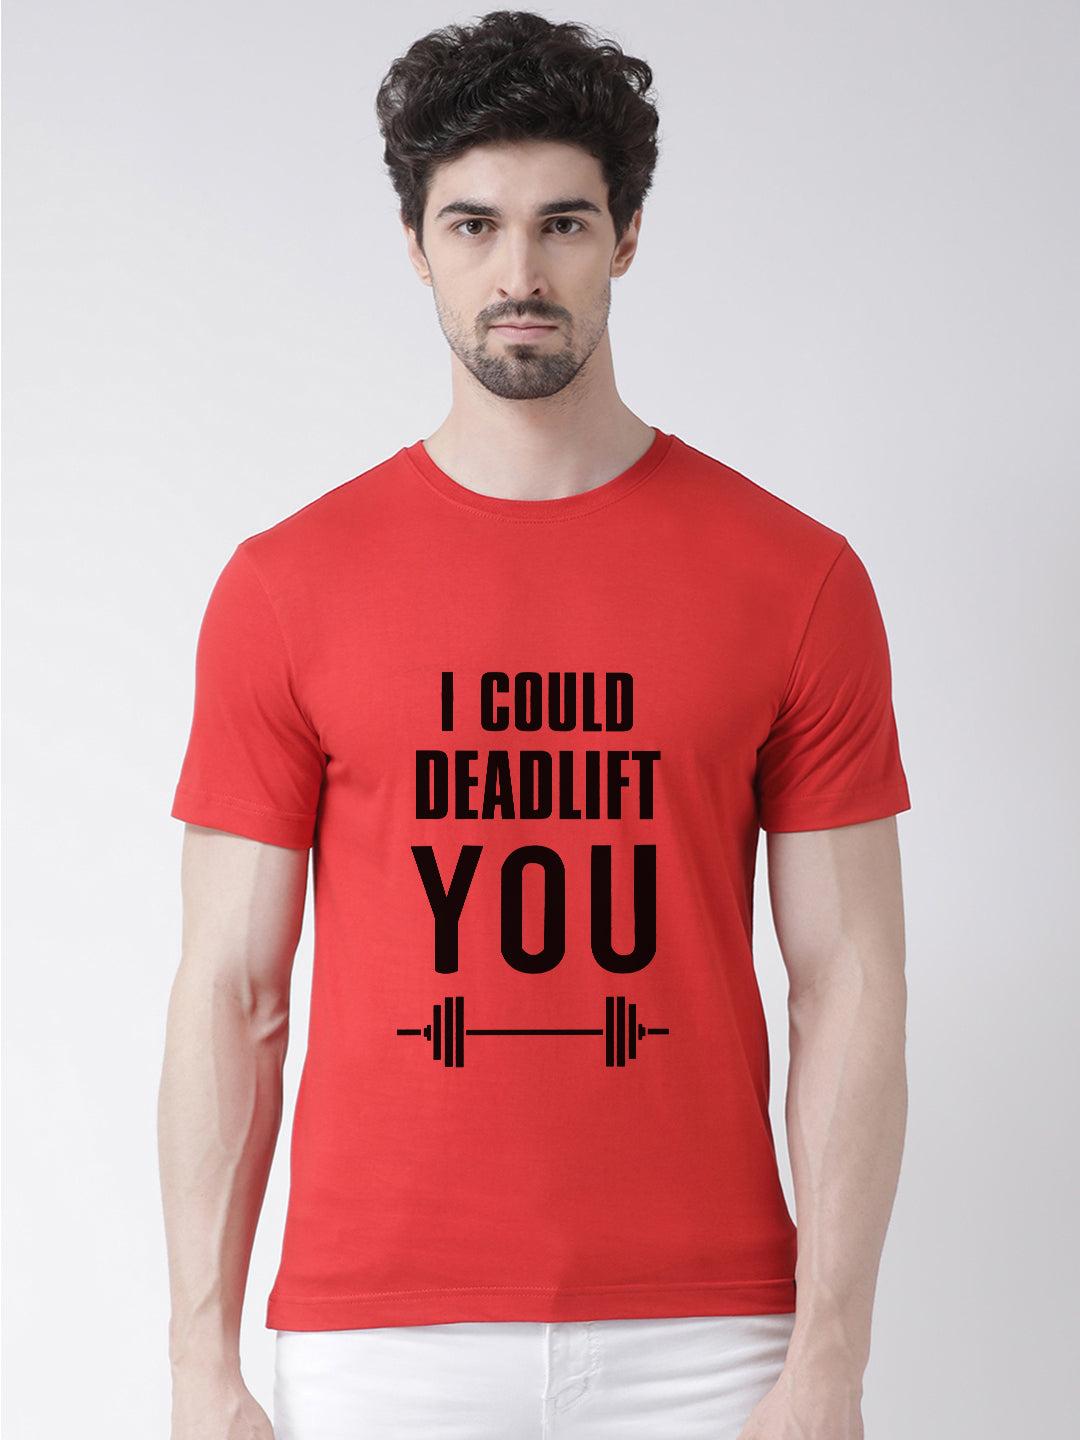 Deadlift Printed Round Neck T-shirt - Friskers